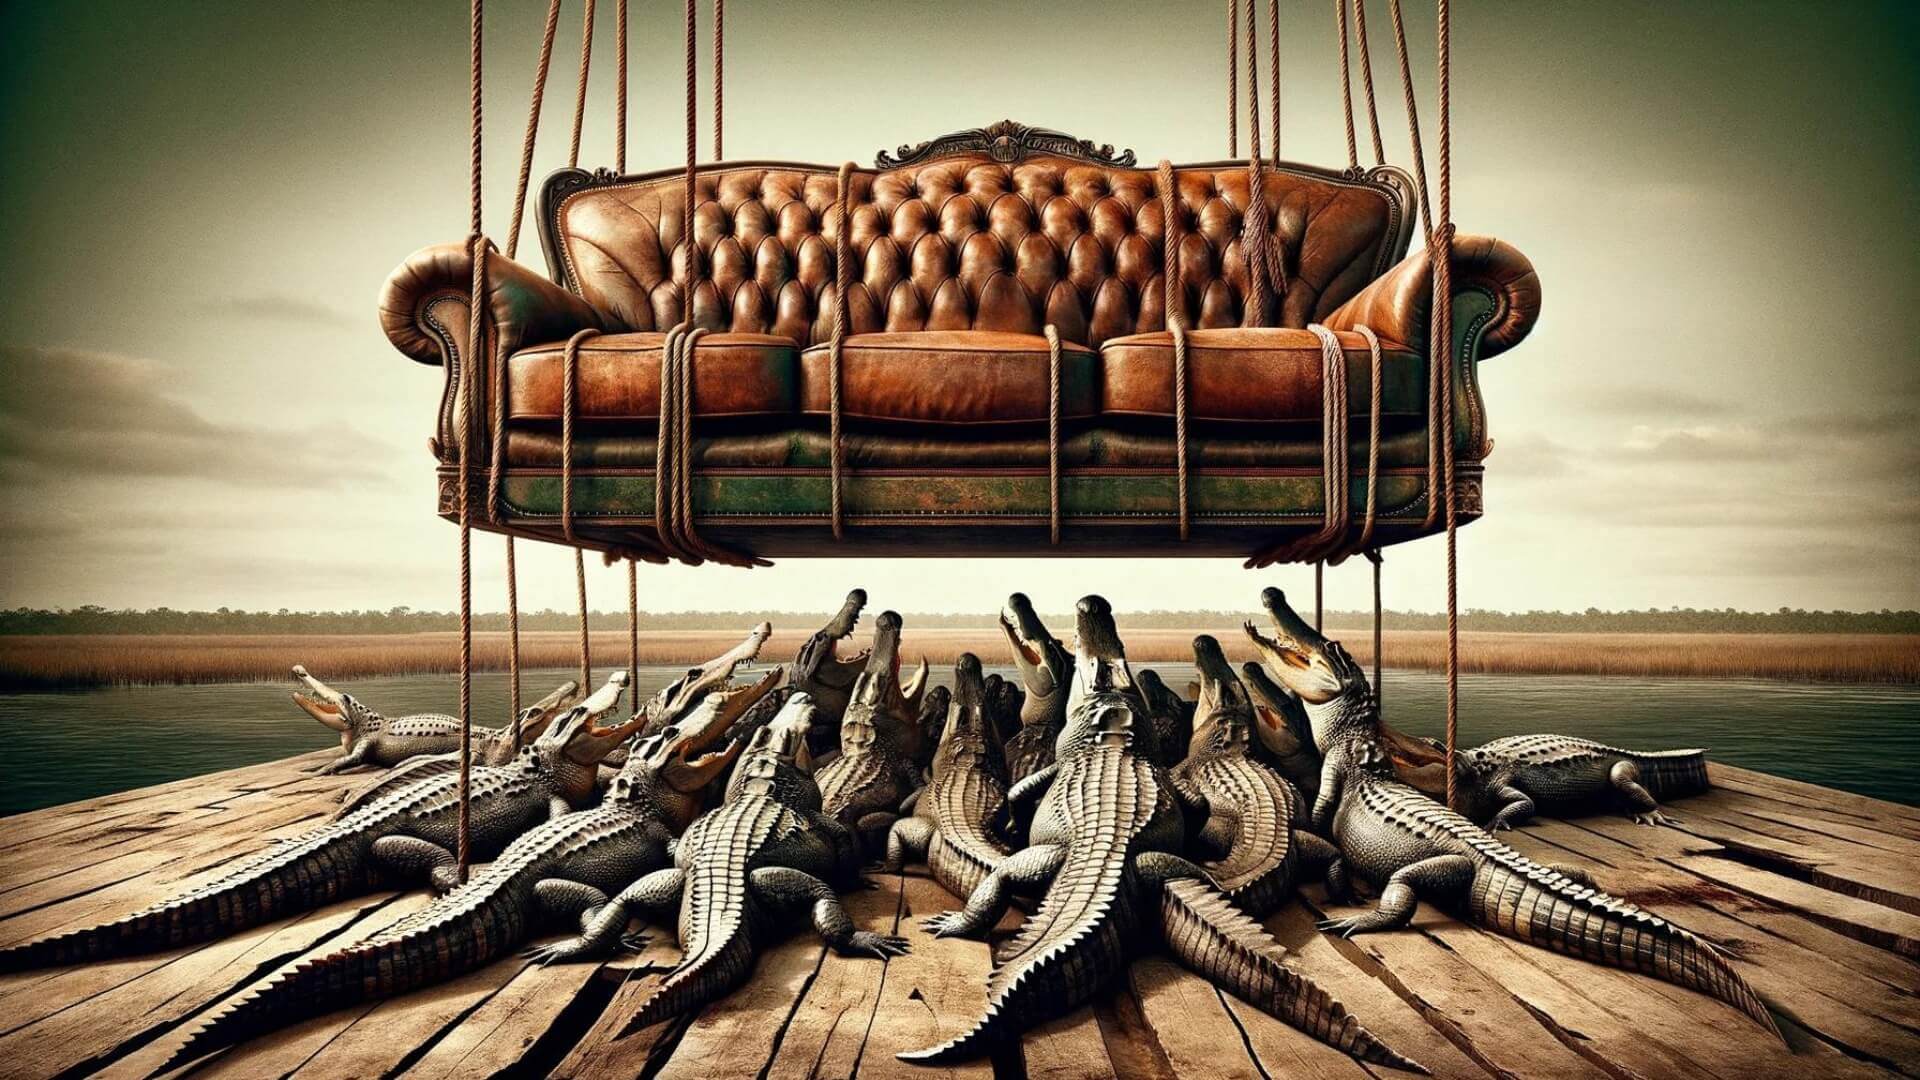 a leather couch held above a group of hungry alligators awaiting it to be lowered